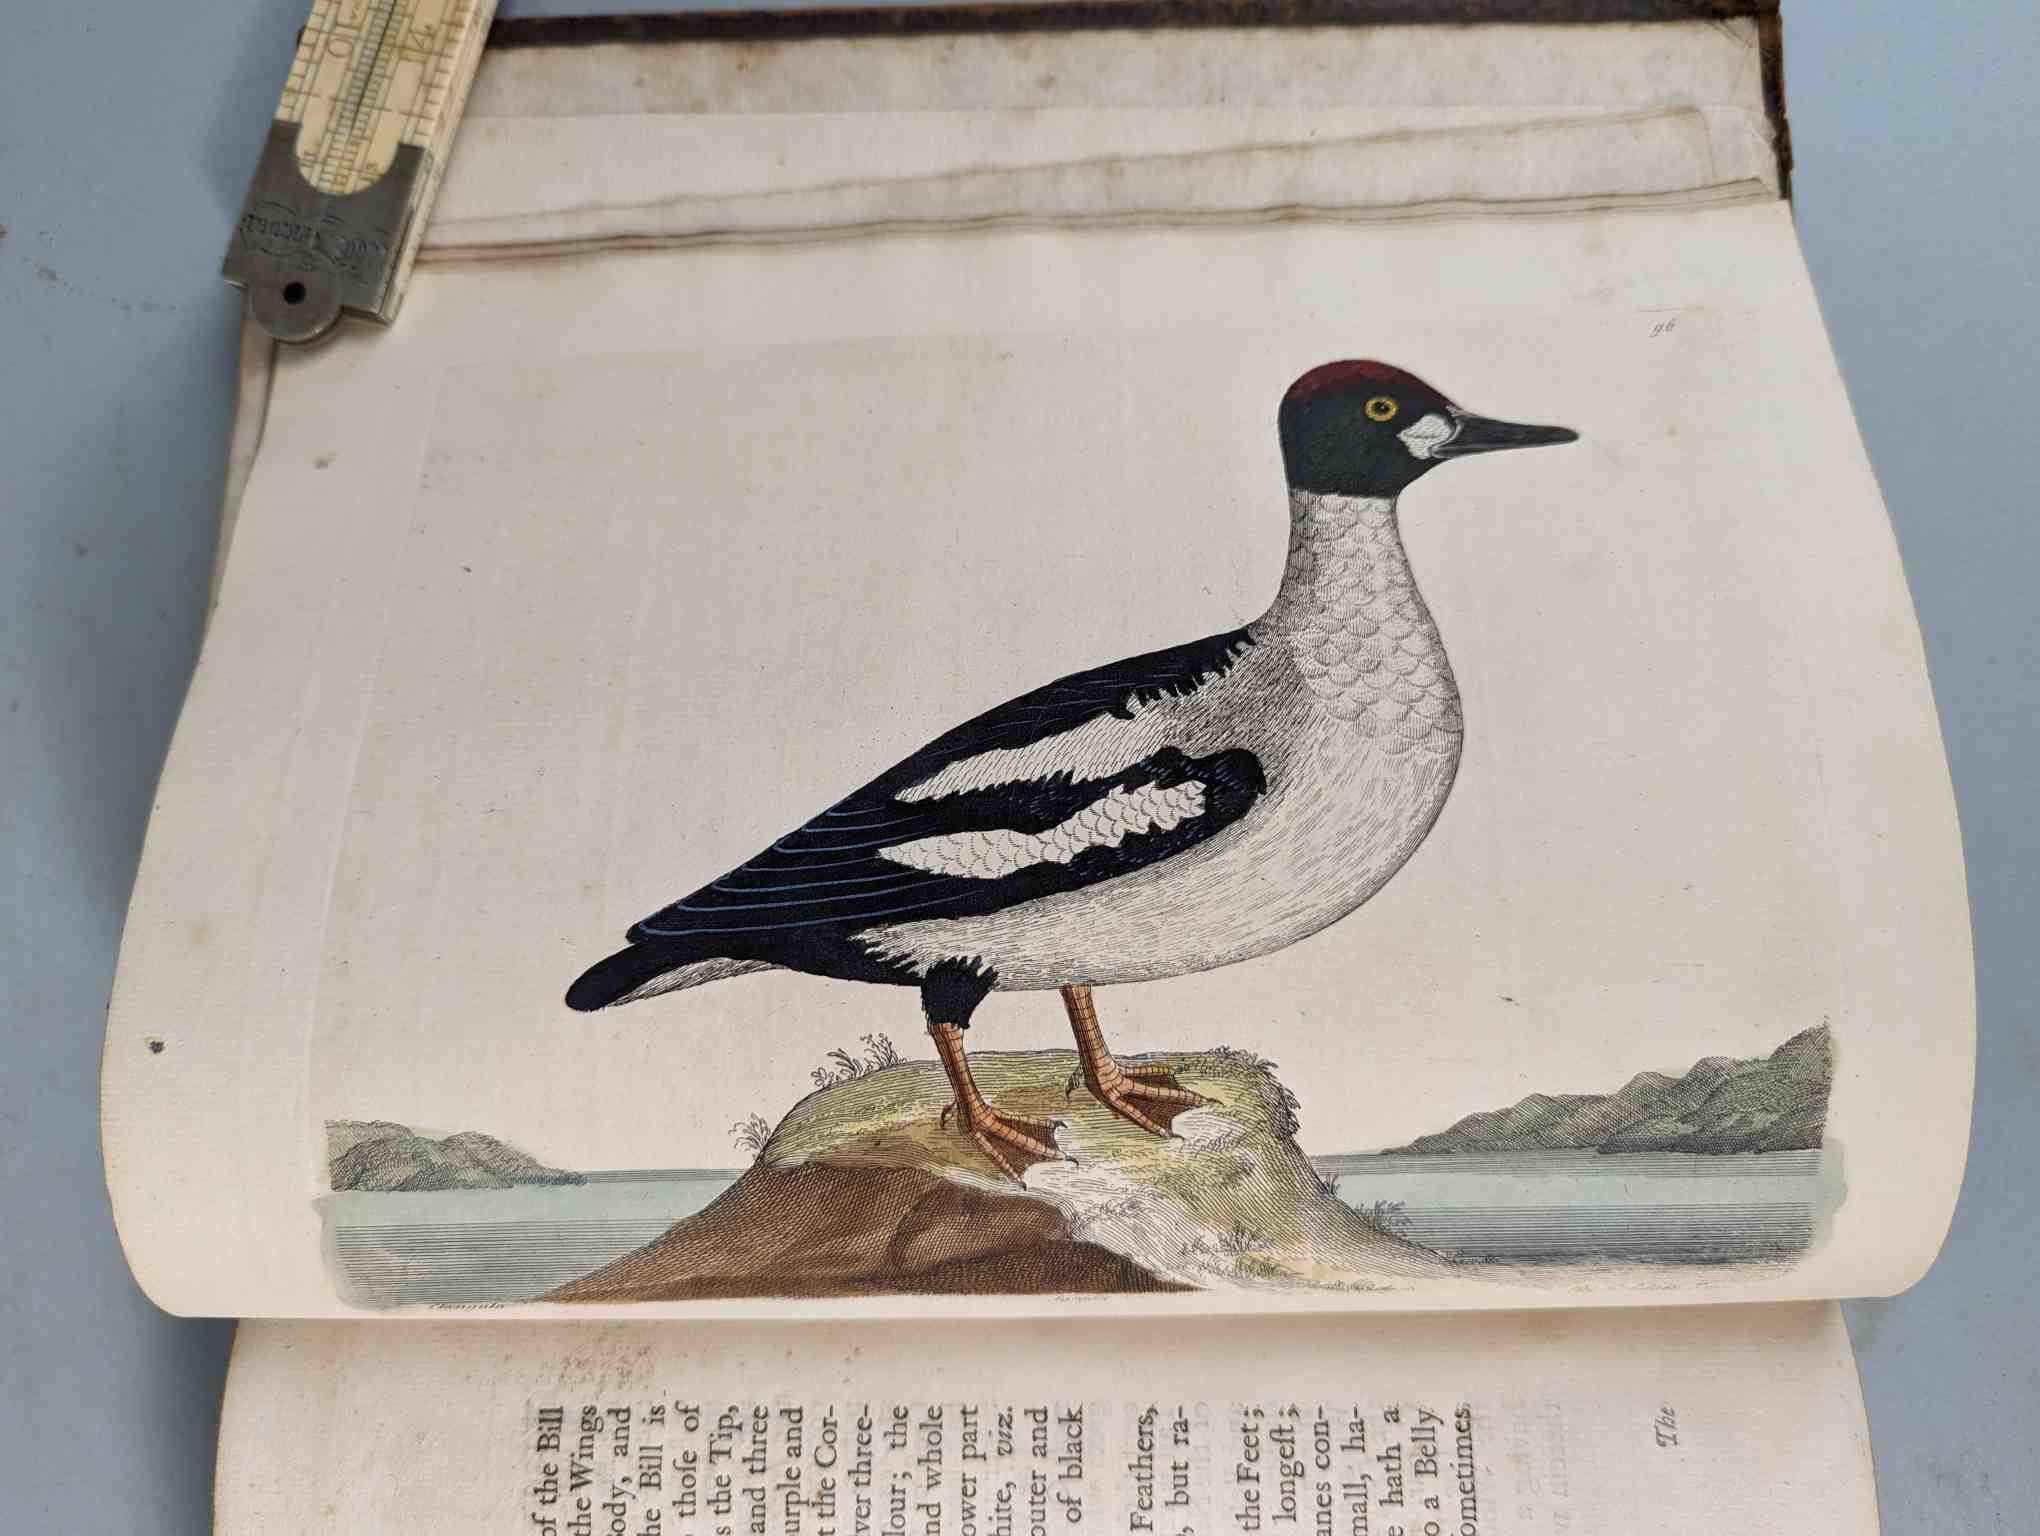 ALBIN, Eleazar. A Natural History of Birds, to which are added, Notes and Observations by W. - Image 99 of 208